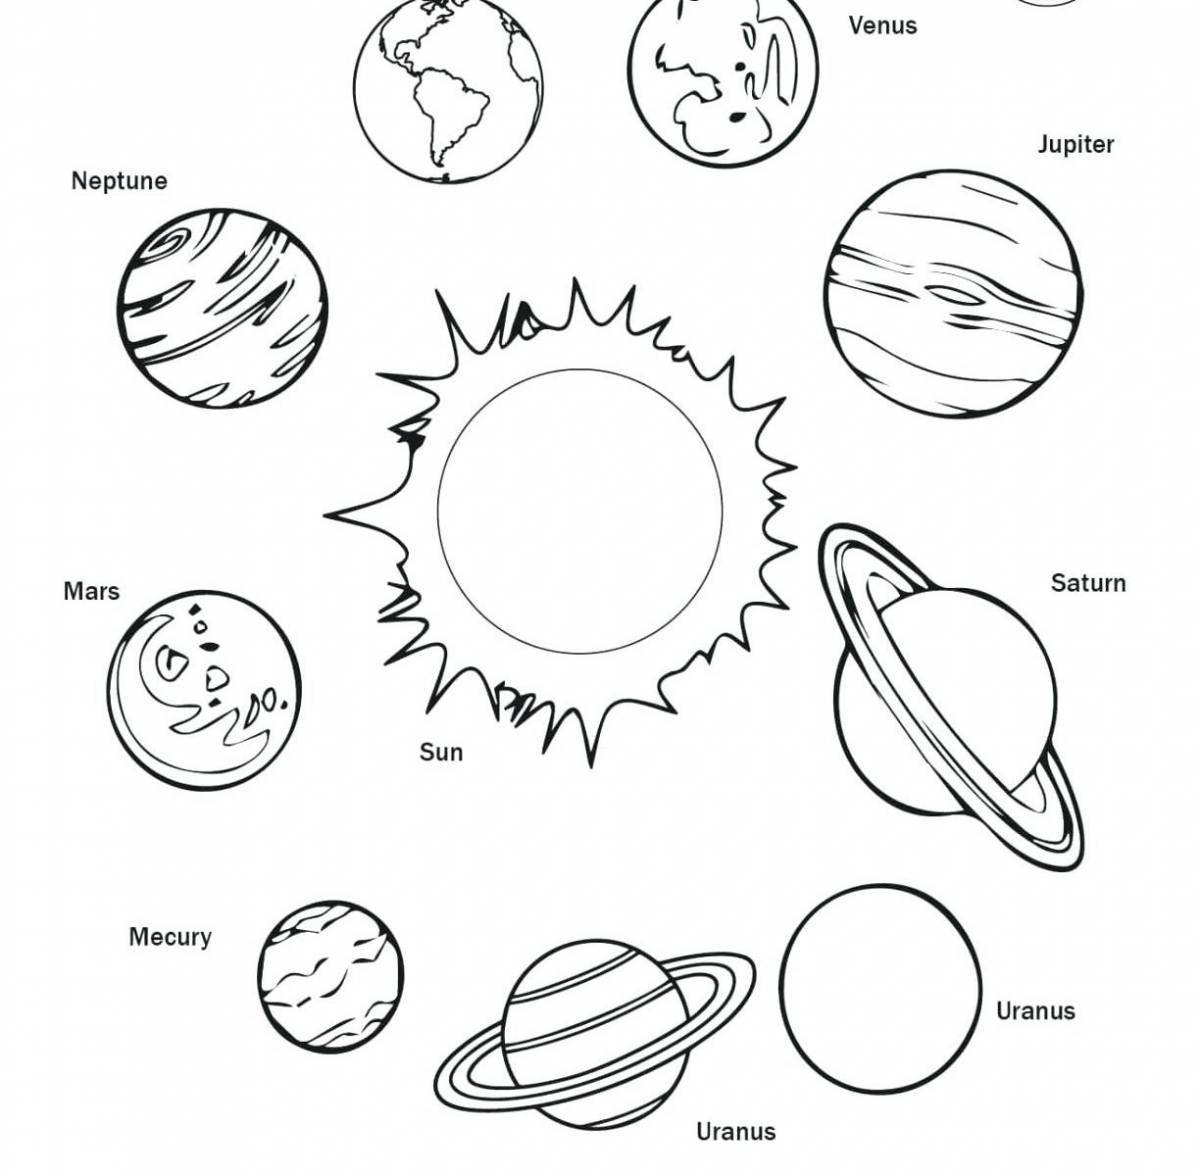 Planets of the solar system for kids #15